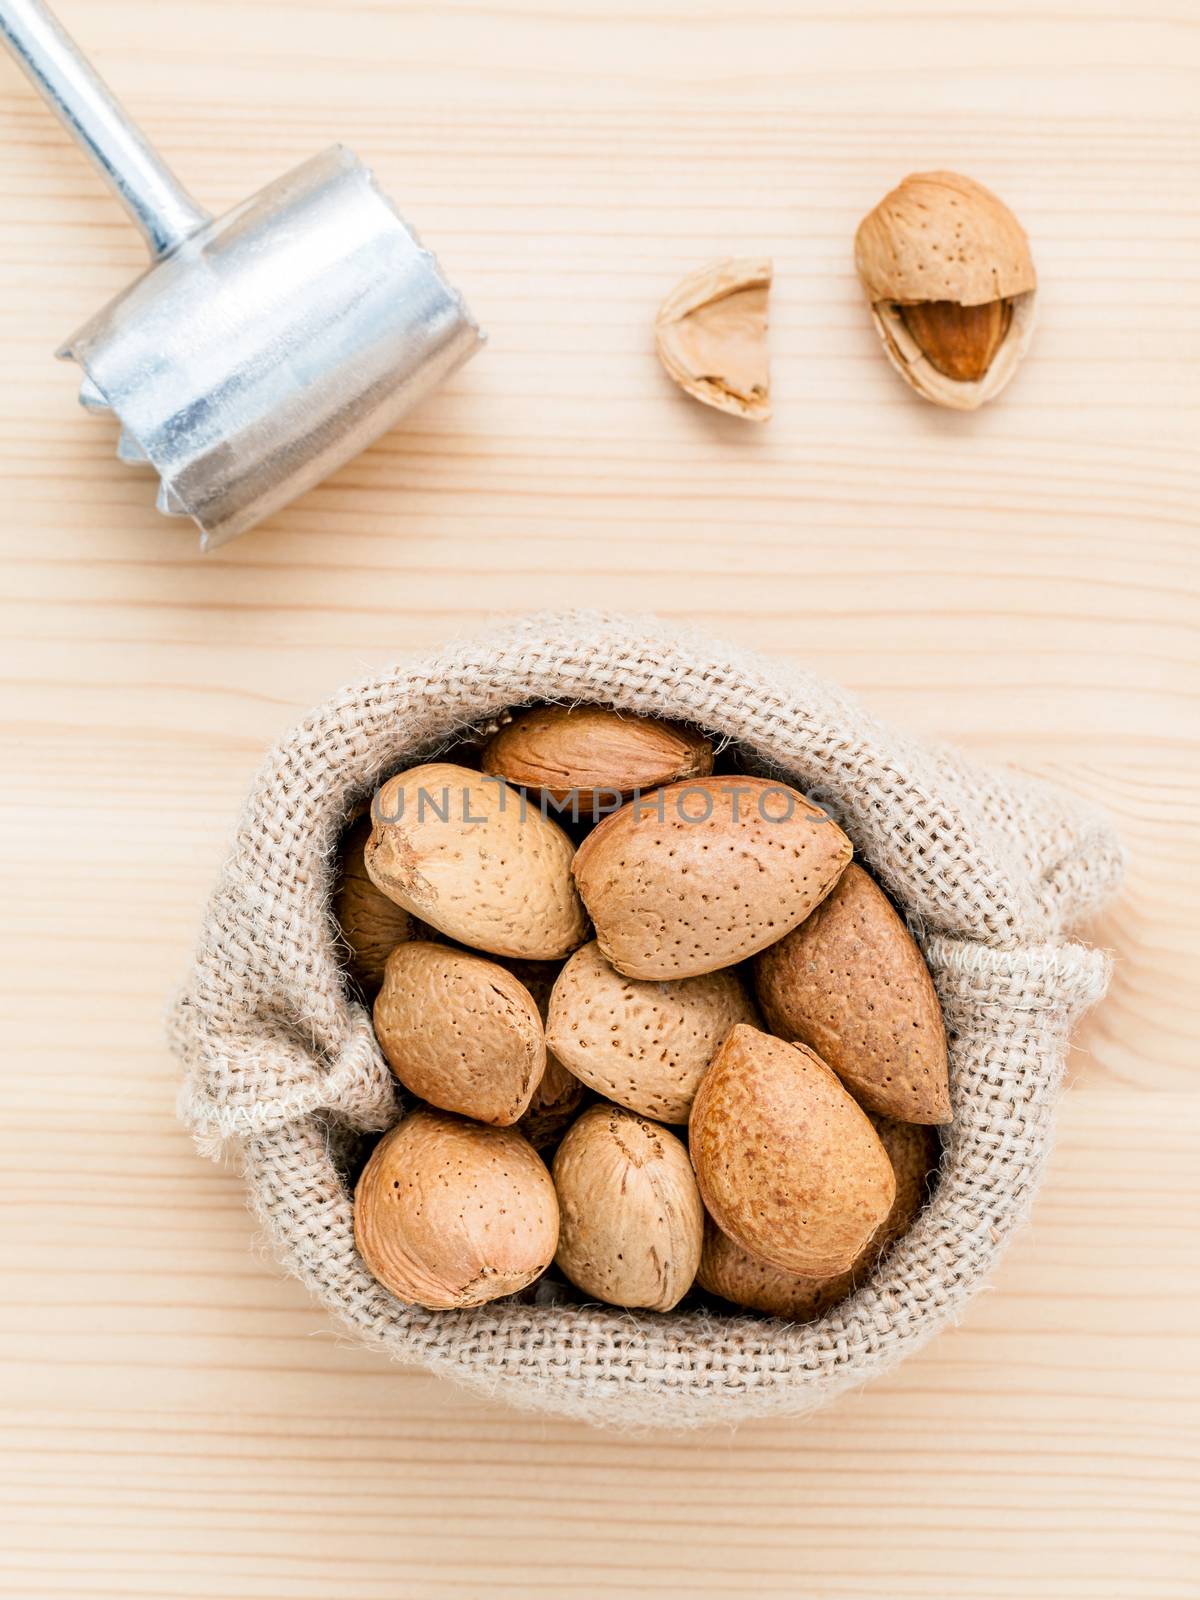 Almonds kernels and whole almonds on wooden background. Whole and chopped almond on wooden background. almond kernels and nutcracker. Selective focus depth of field.